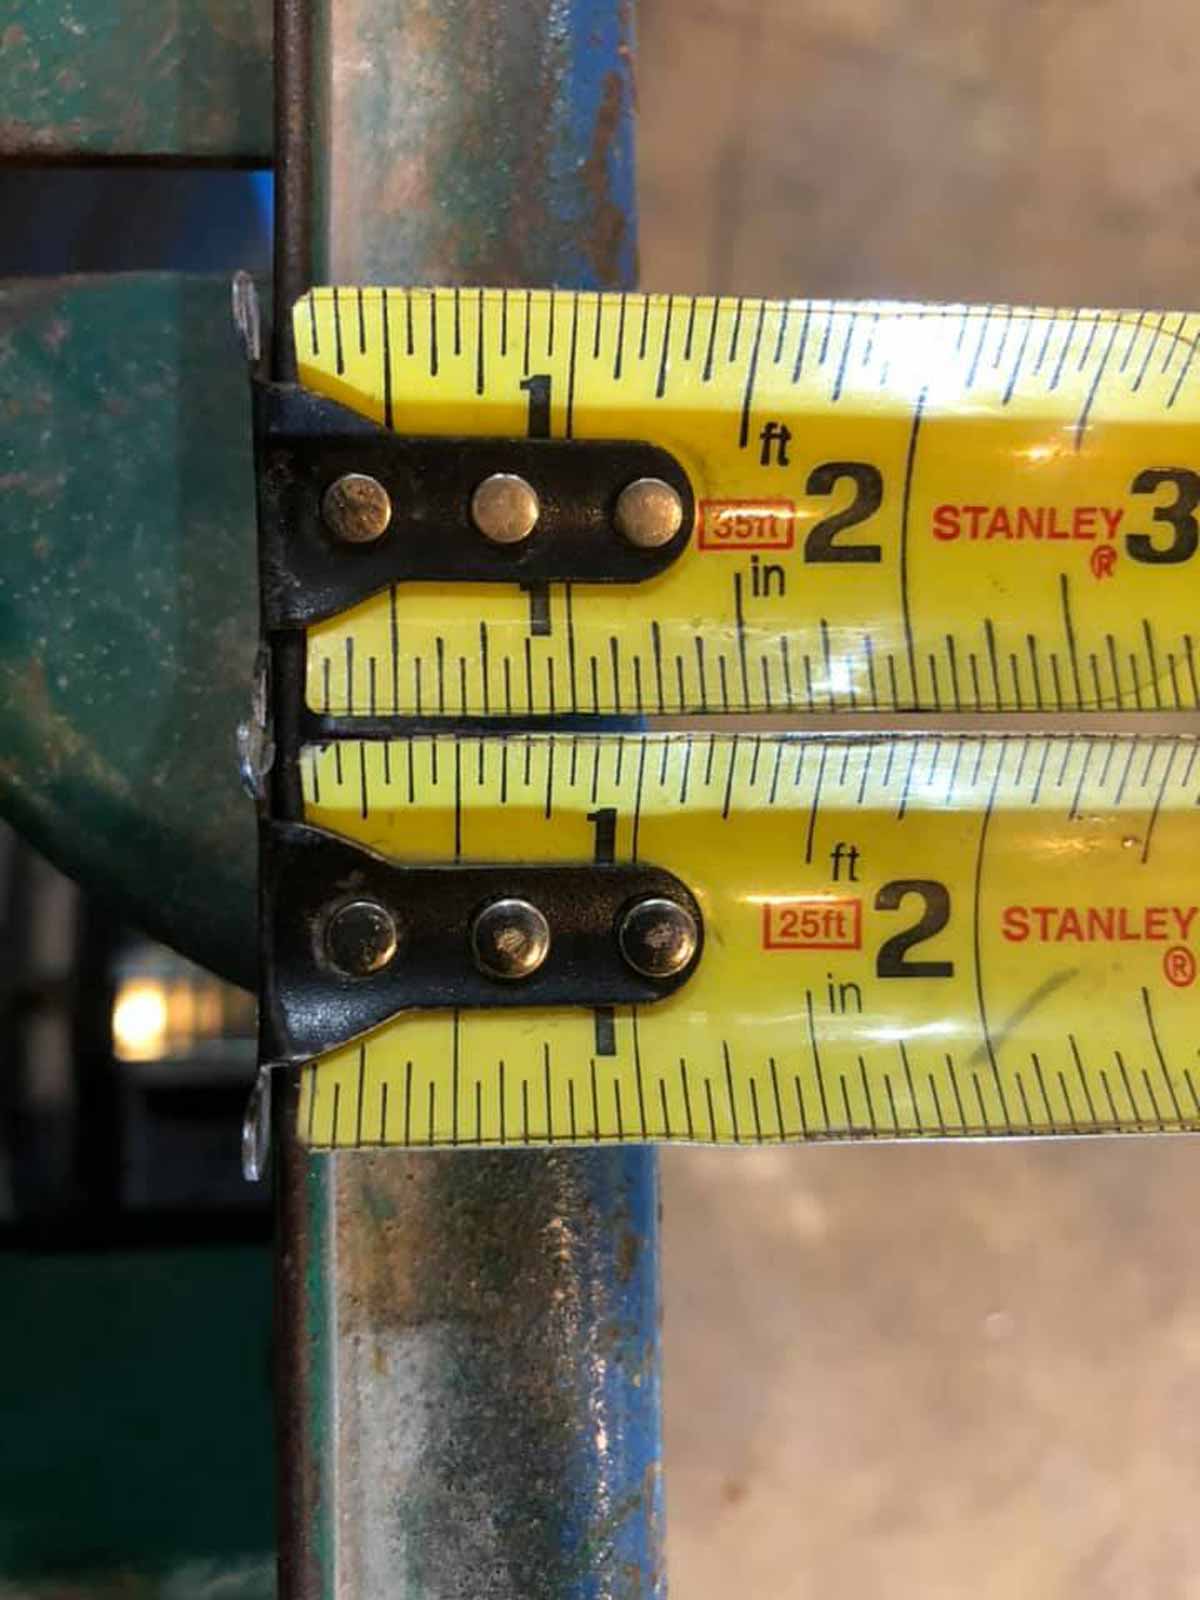 The beginnings of two measuring tapes and the first inch is two different lengths